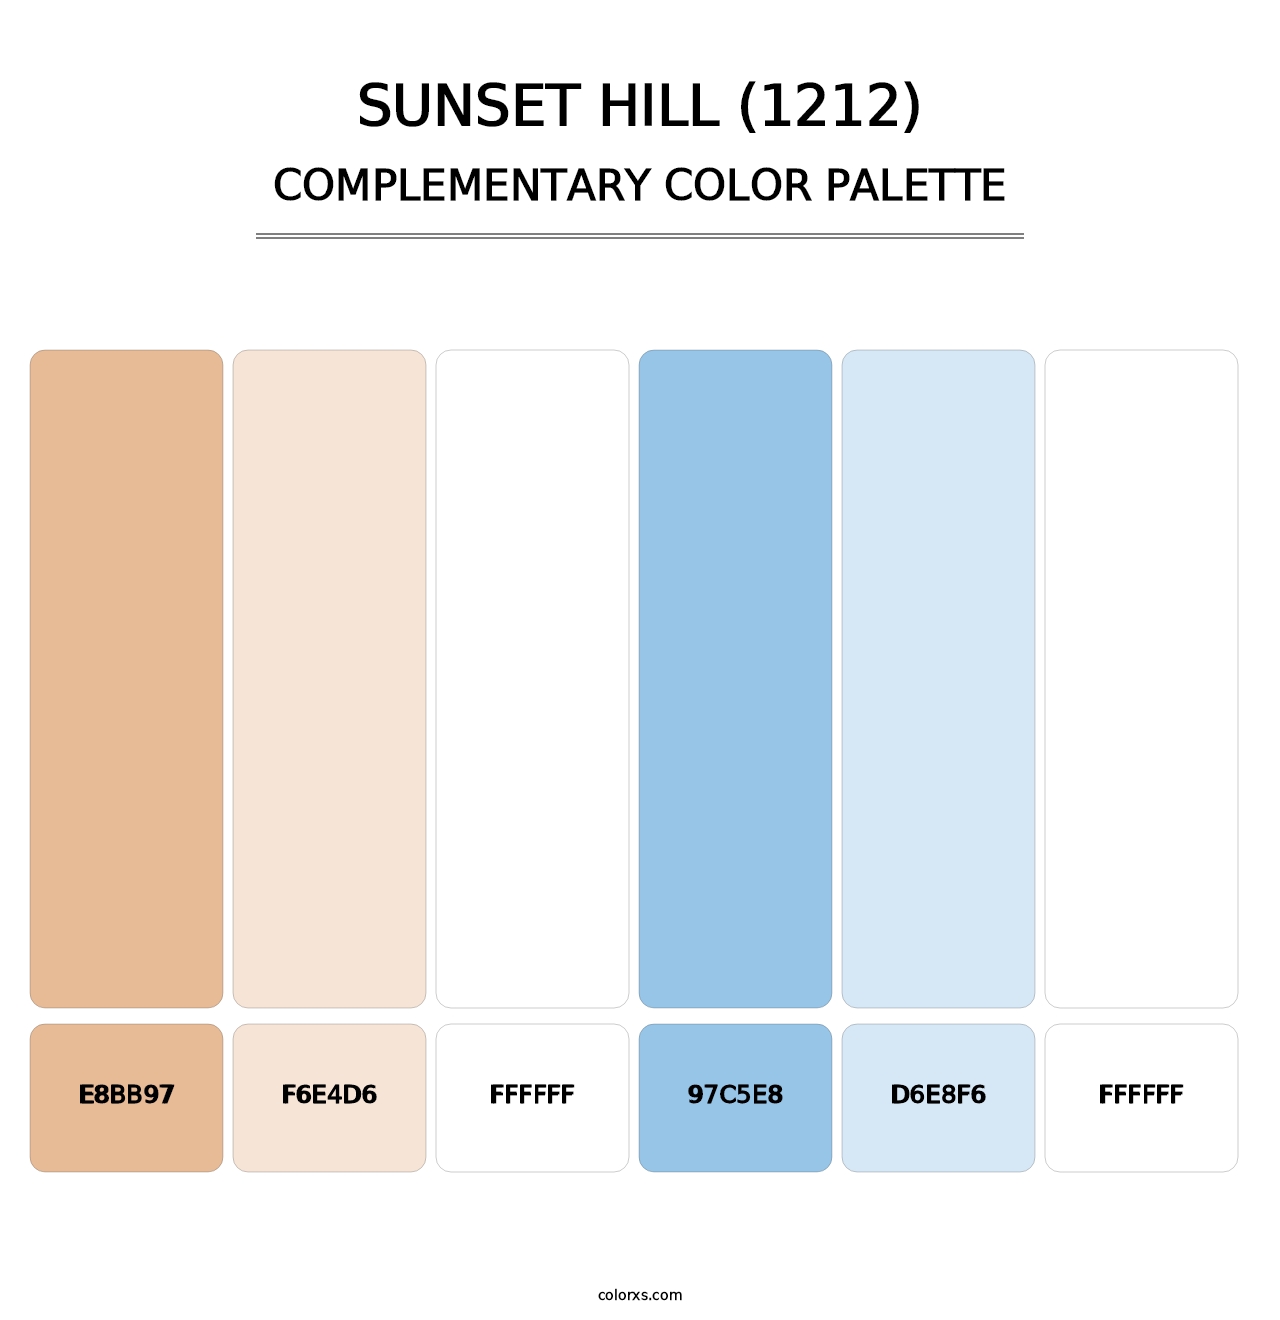 Sunset Hill (1212) - Complementary Color Palette